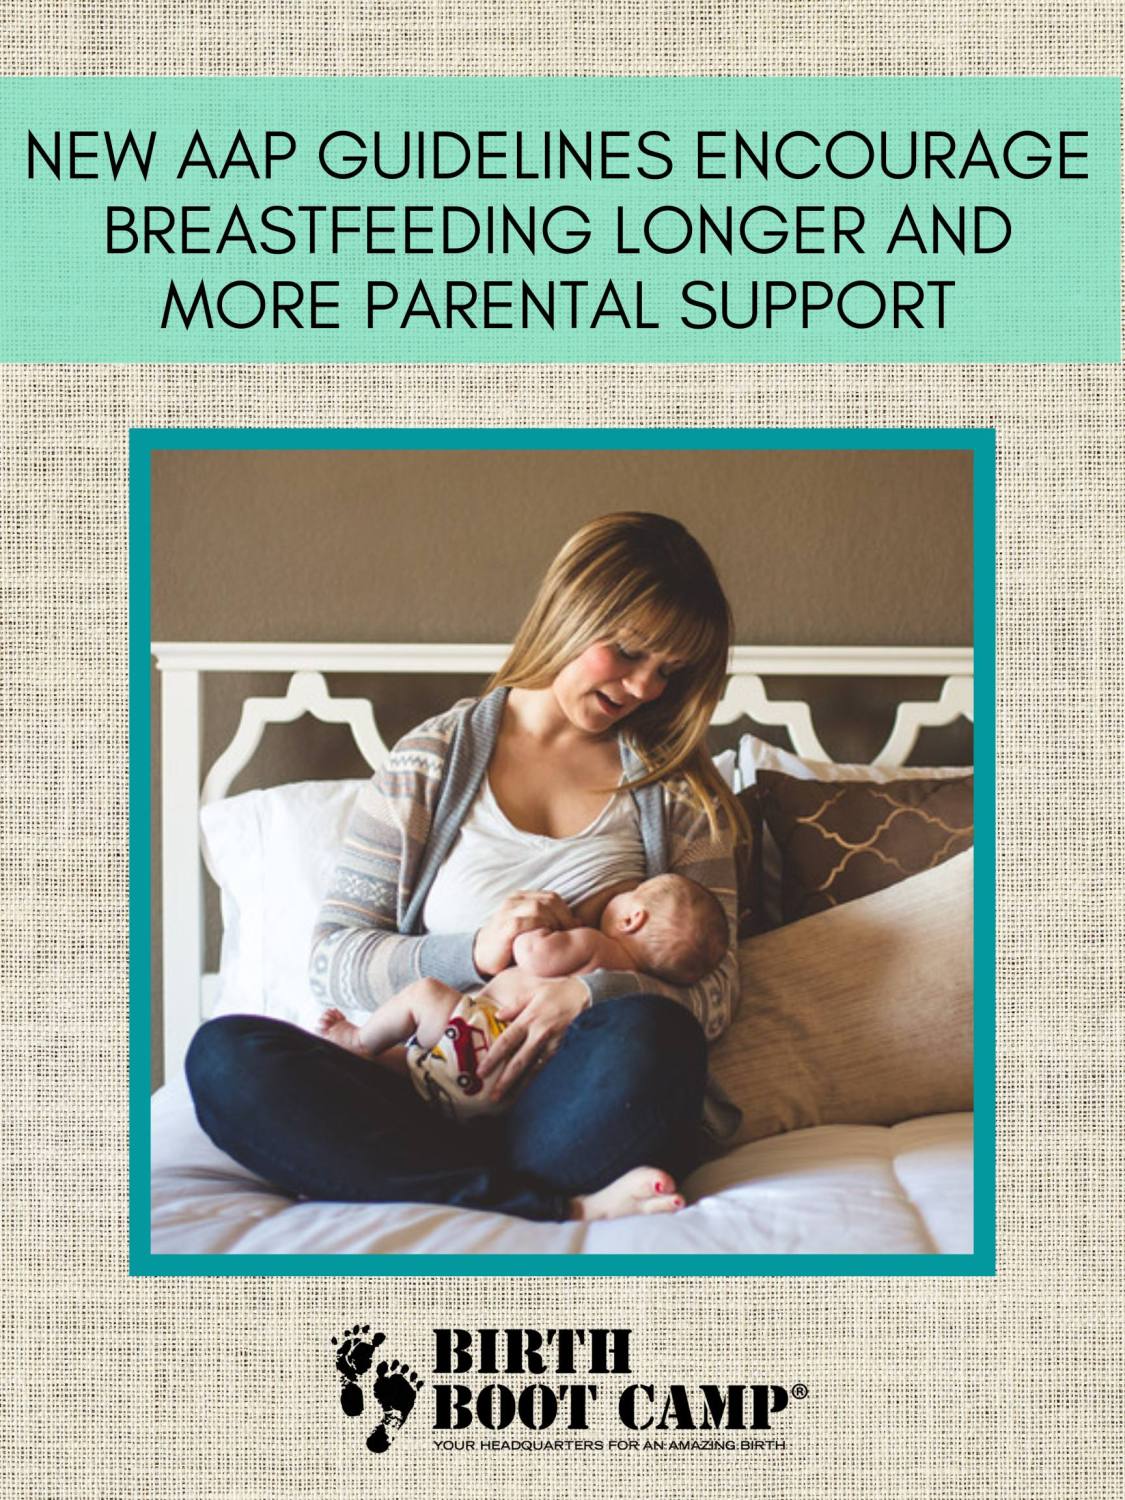 New AAP Guidelines Encourage Breastfeeding Longer And More Parental Support